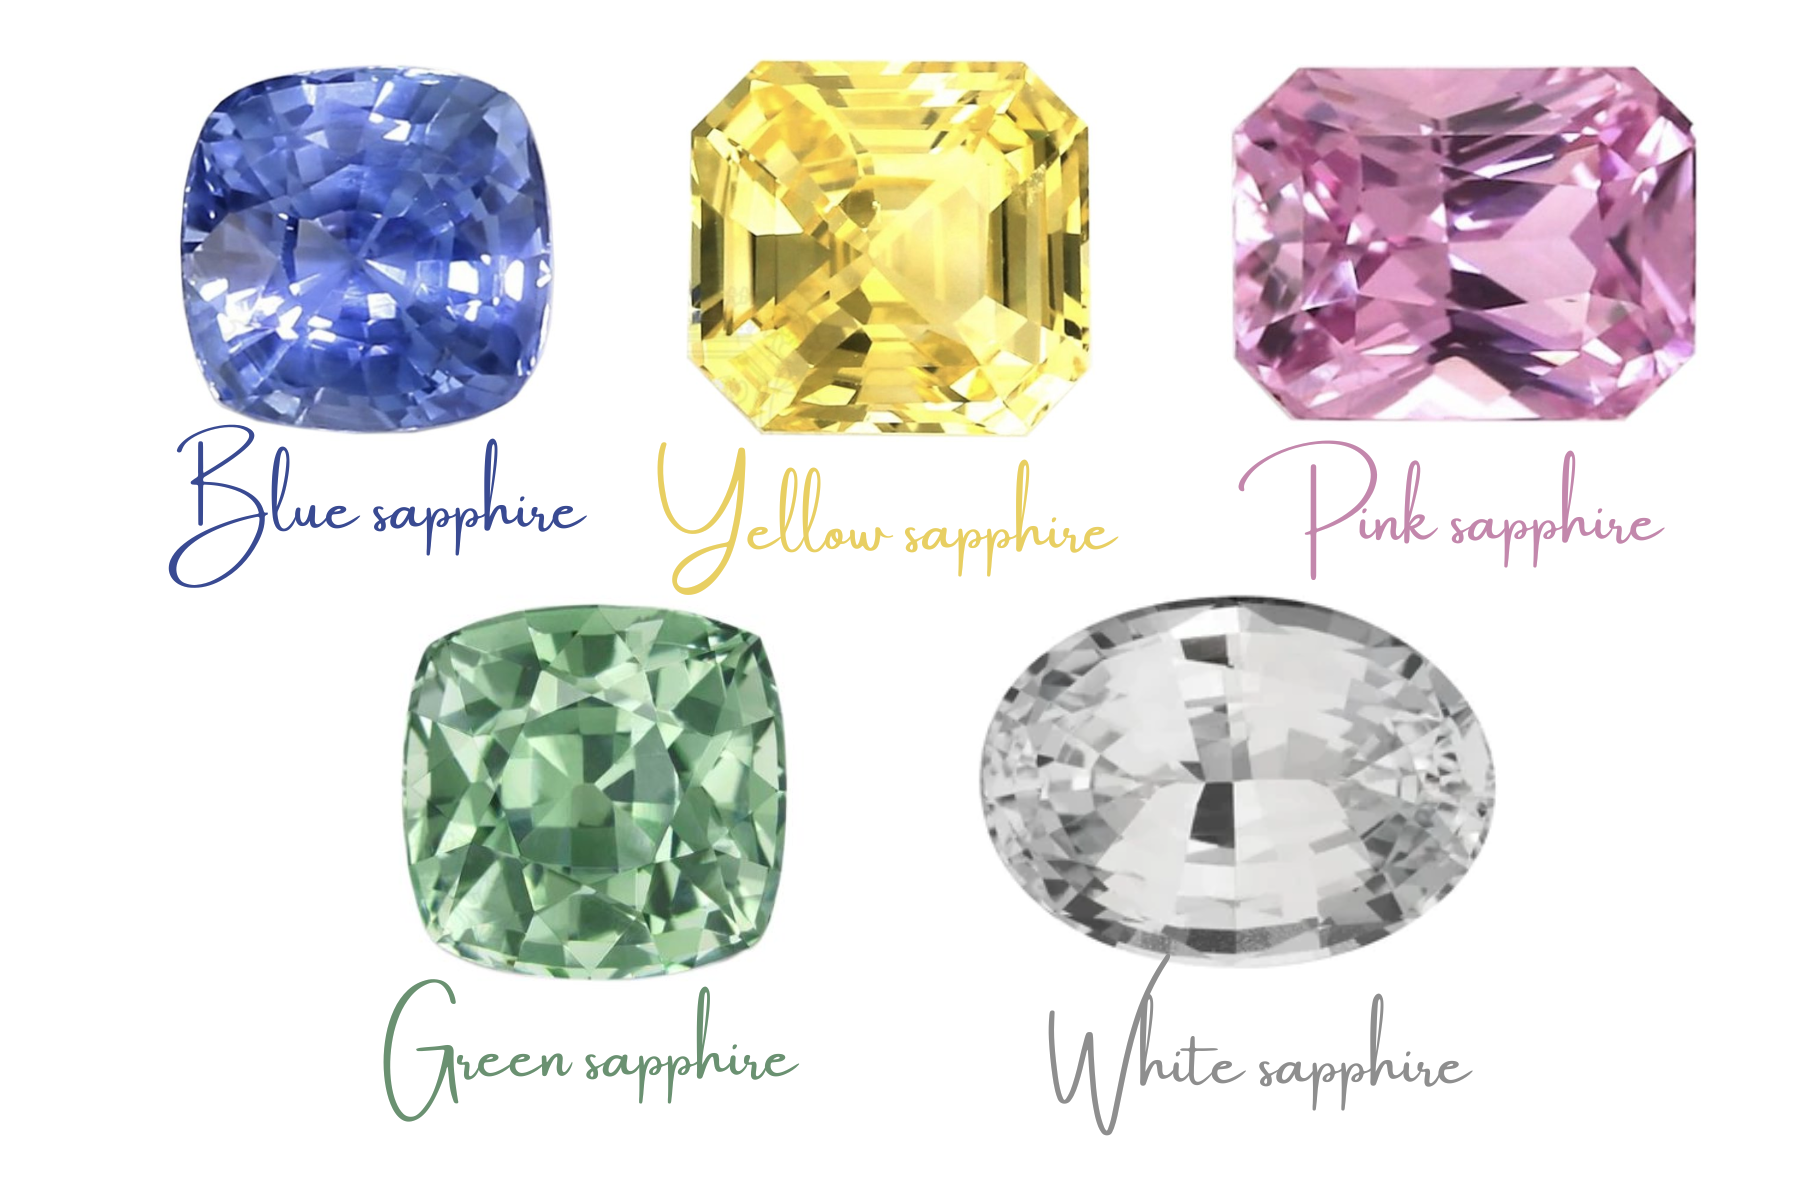 Types Of Sapphire - Most Stunning And Rarest Colors